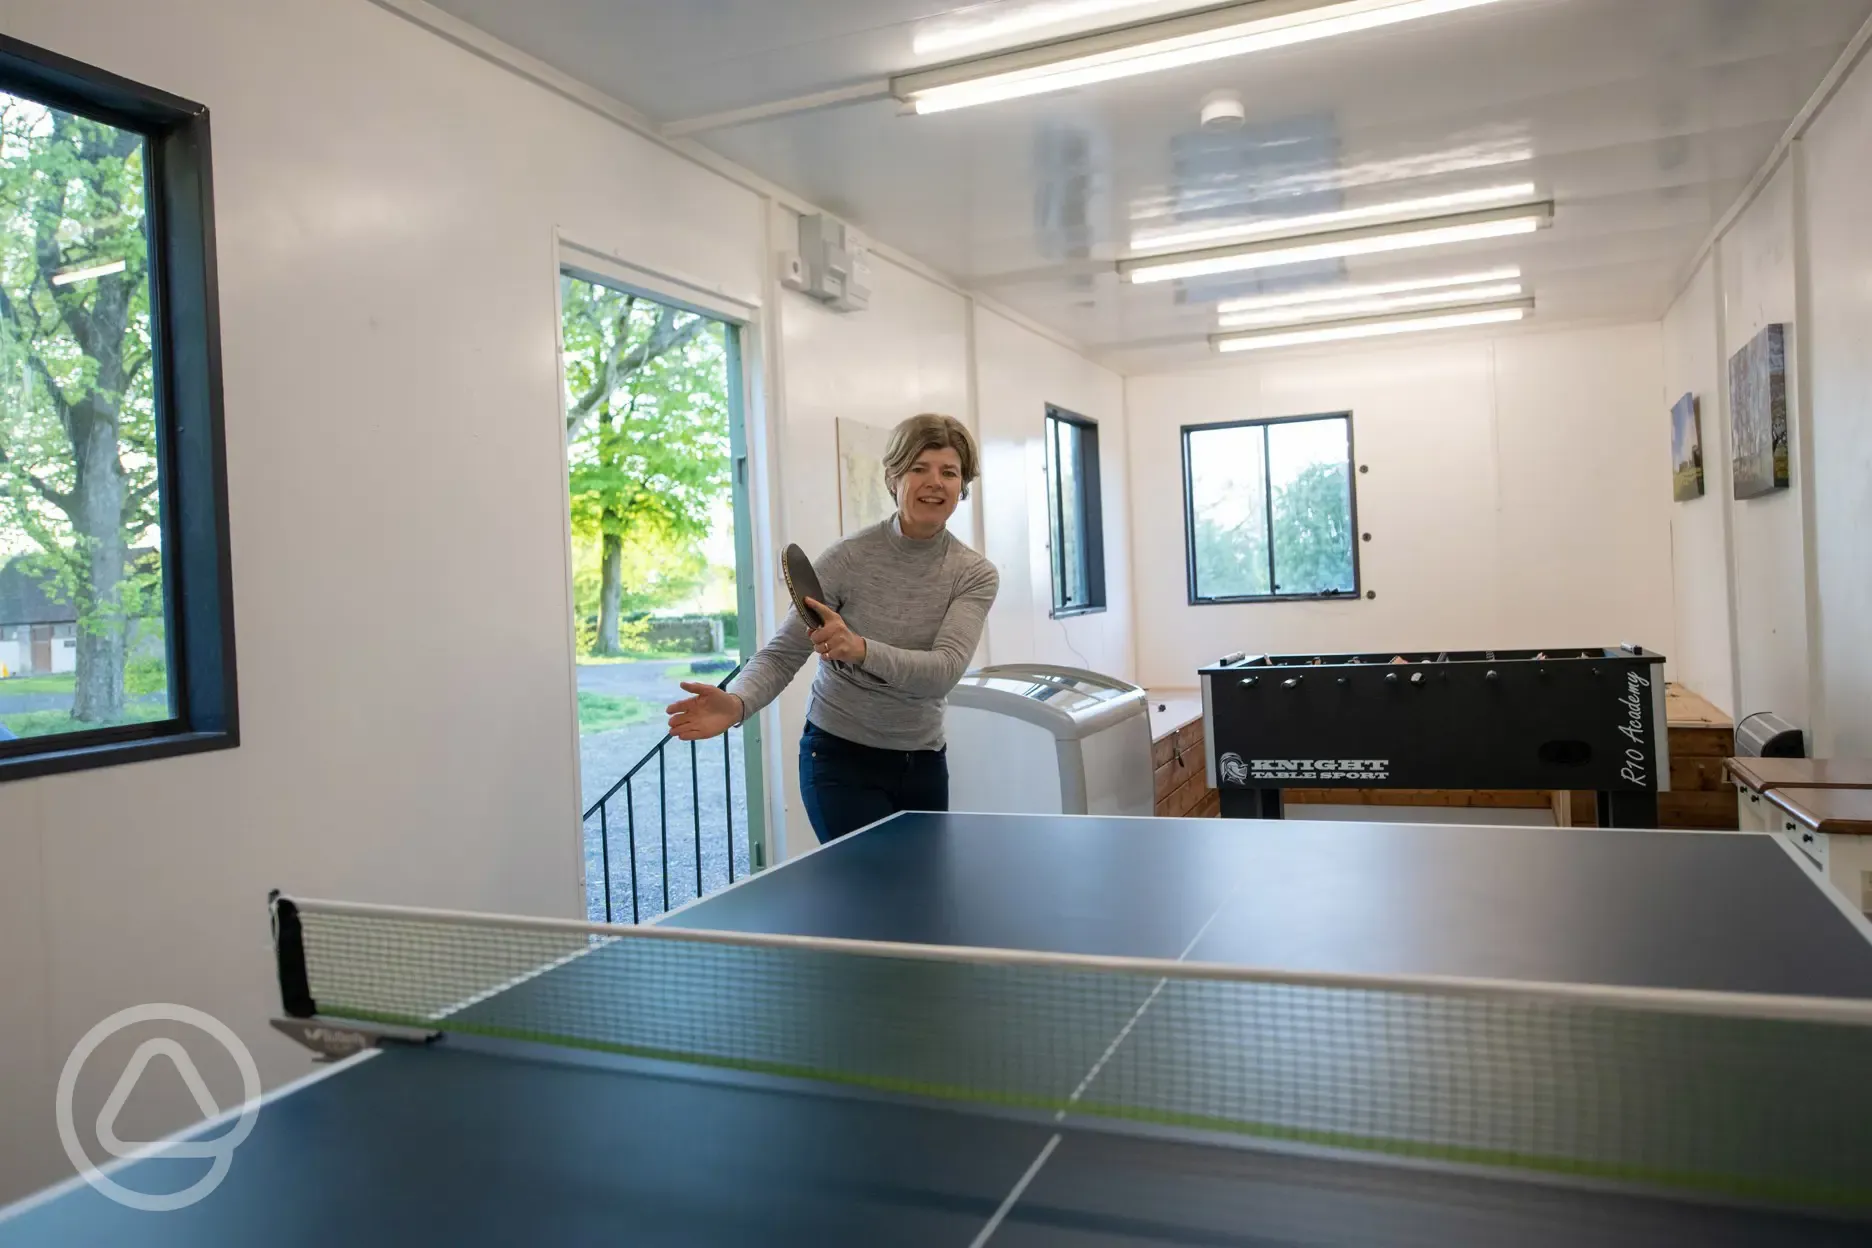 Tennis table in the games room